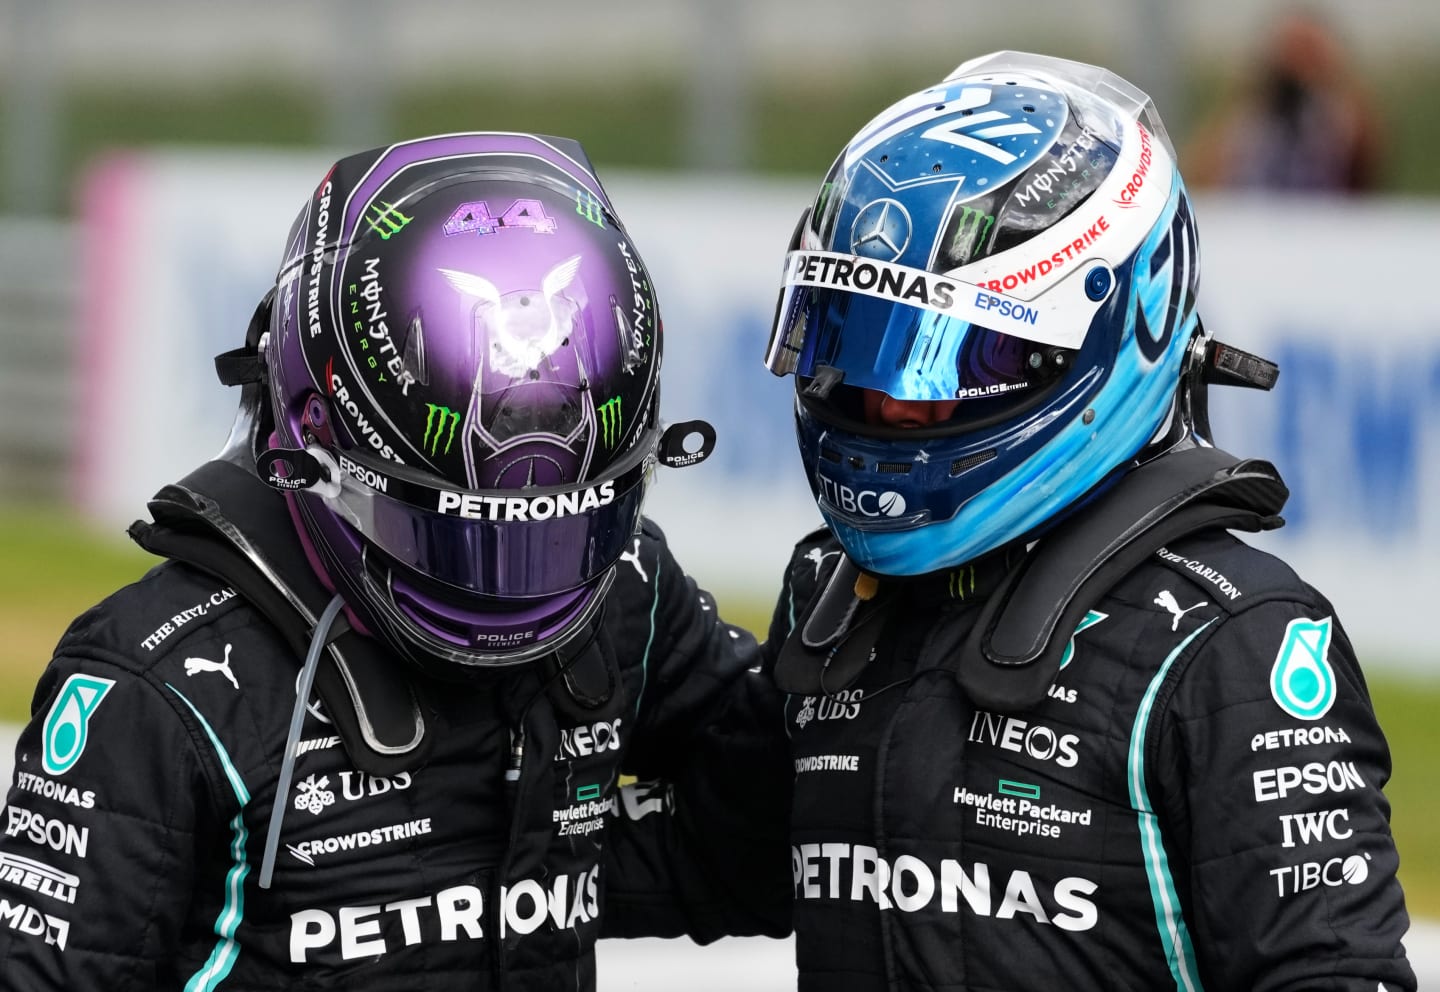 SPIELBERG, AUSTRIA - JUNE 27: Second placed Lewis Hamilton of Great Britain and Mercedes GP and third placed Valtteri Bottas of Finland and Mercedes GP hug in parc ferme during the F1 Grand Prix of Styria at Red Bull Ring on June 27, 2021 in Spielberg, Austria. (Photo by Darko Vojinovic - Pool/Getty Images)